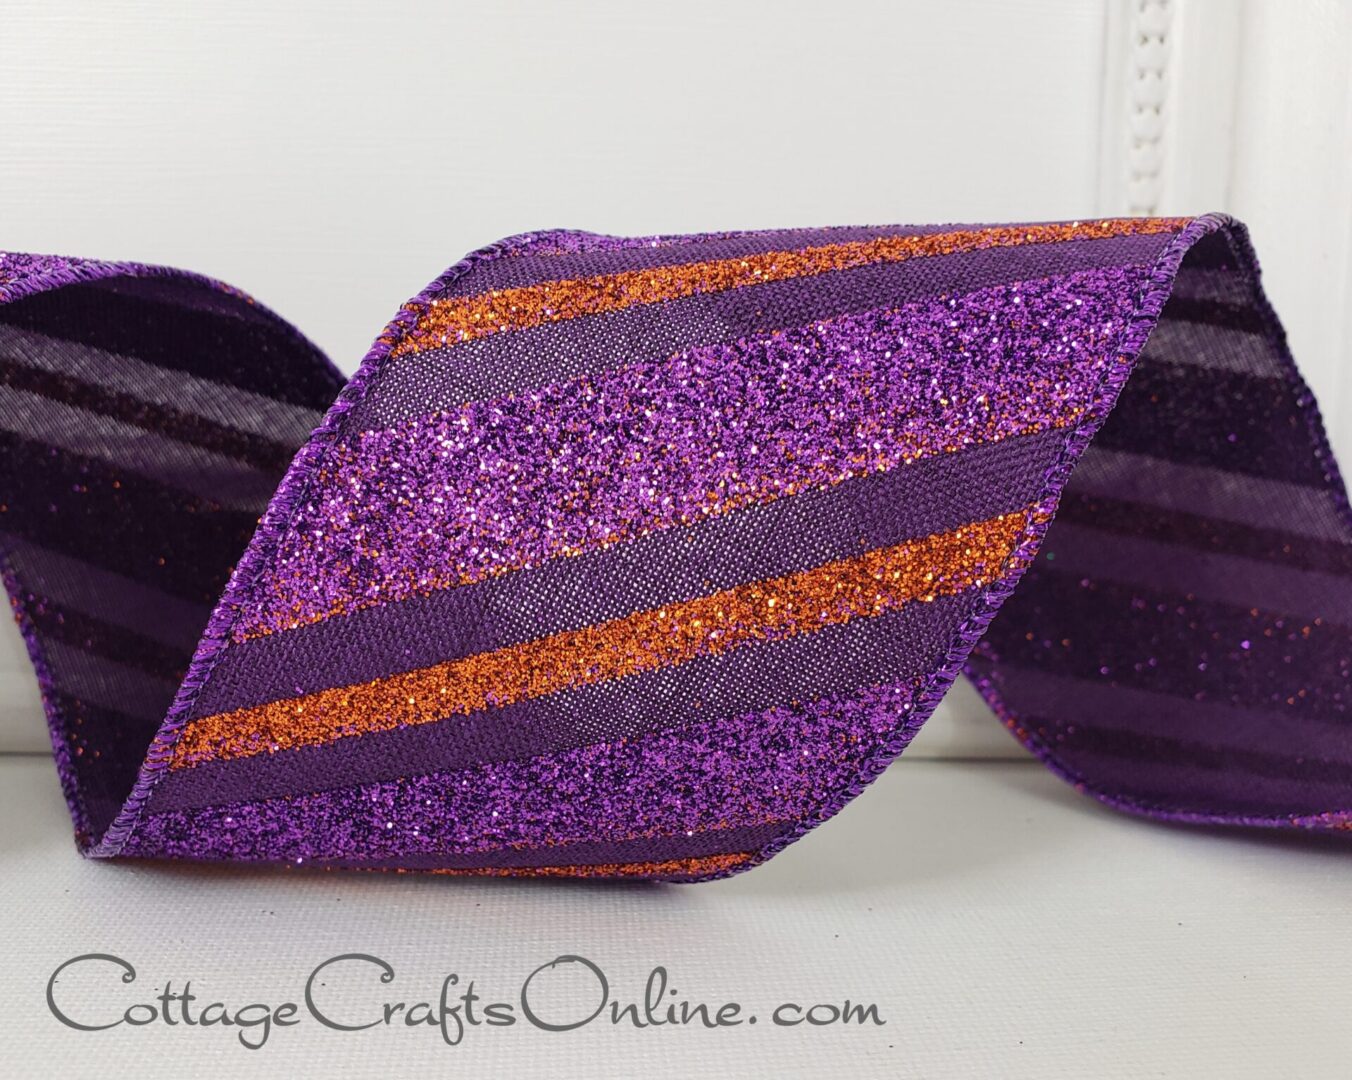 Diagonal stripes purple and orange glitter purple mesh 2.5" wide wired ribbon from the Etsy shop of Cottage Crafts Online.